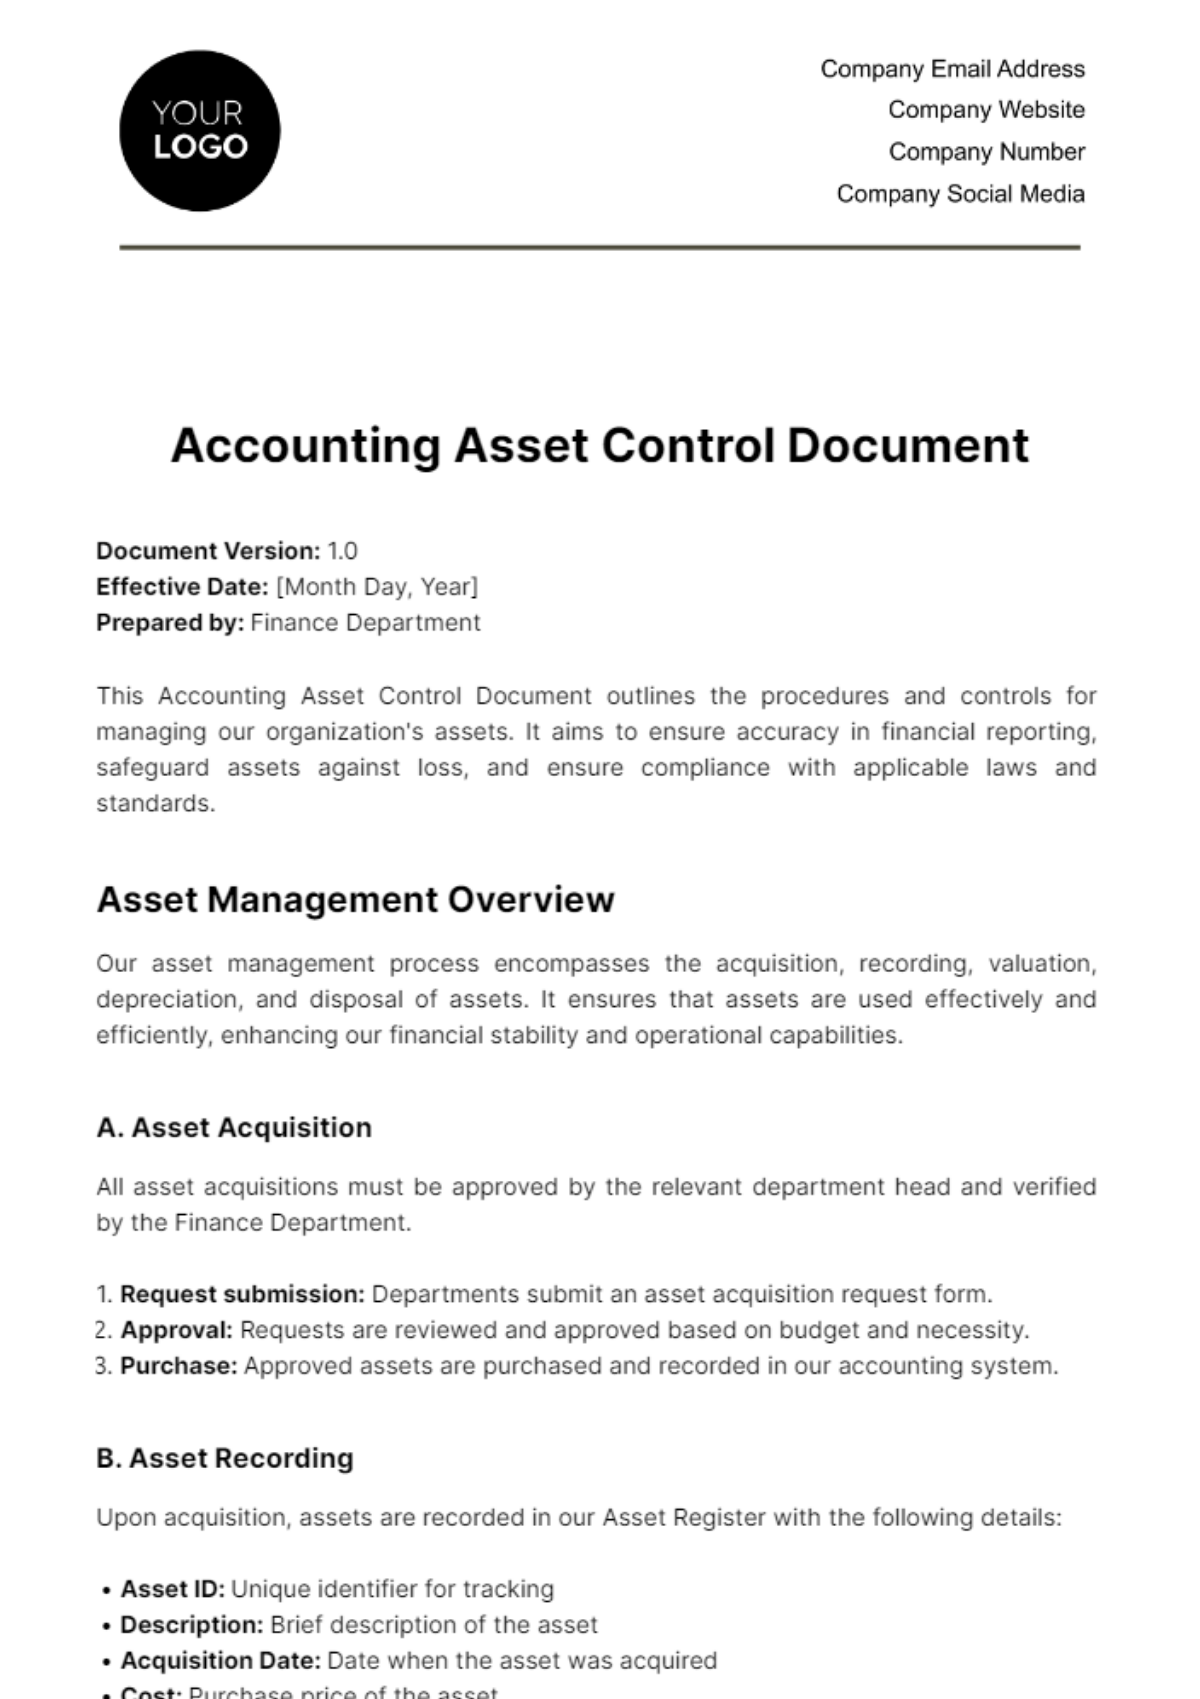 Free Accounting Asset Control Document Template